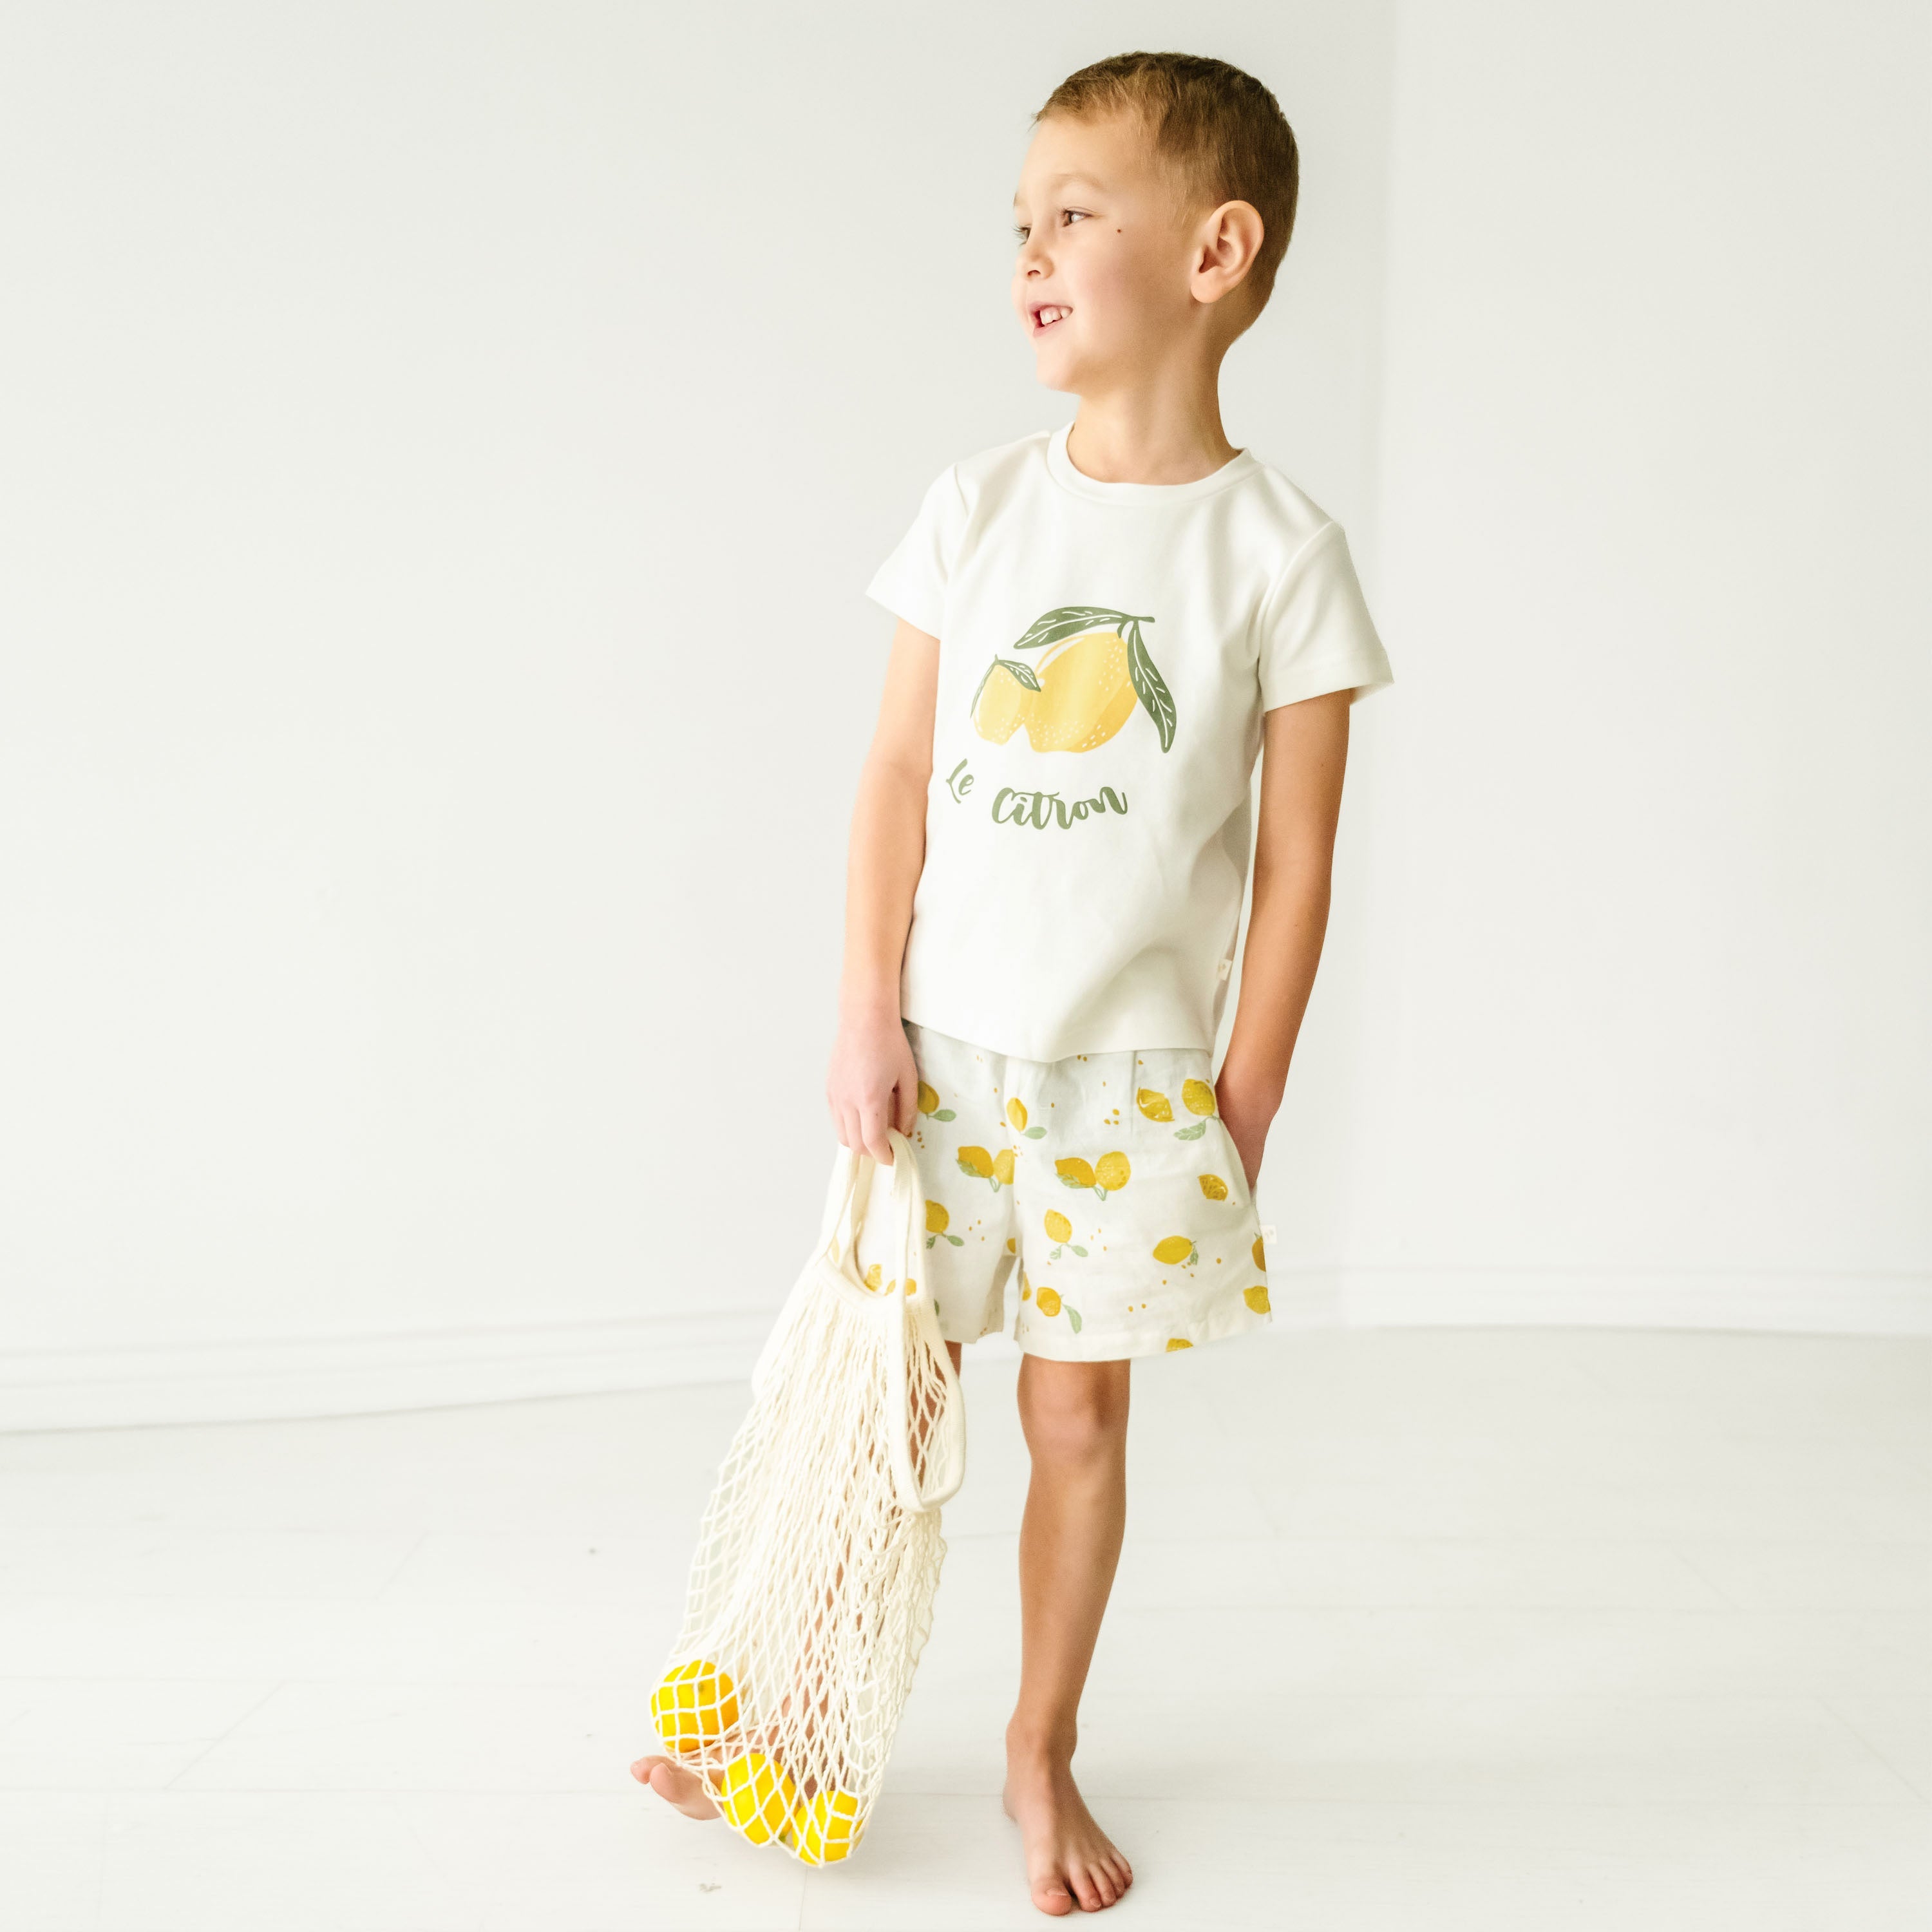 A toddler in a Organic Crew Neck Tee - Le Citron t-shirt and lemon-print shorts smiles while holding a net bag filled with lemons, standing in a bright room with a white background.